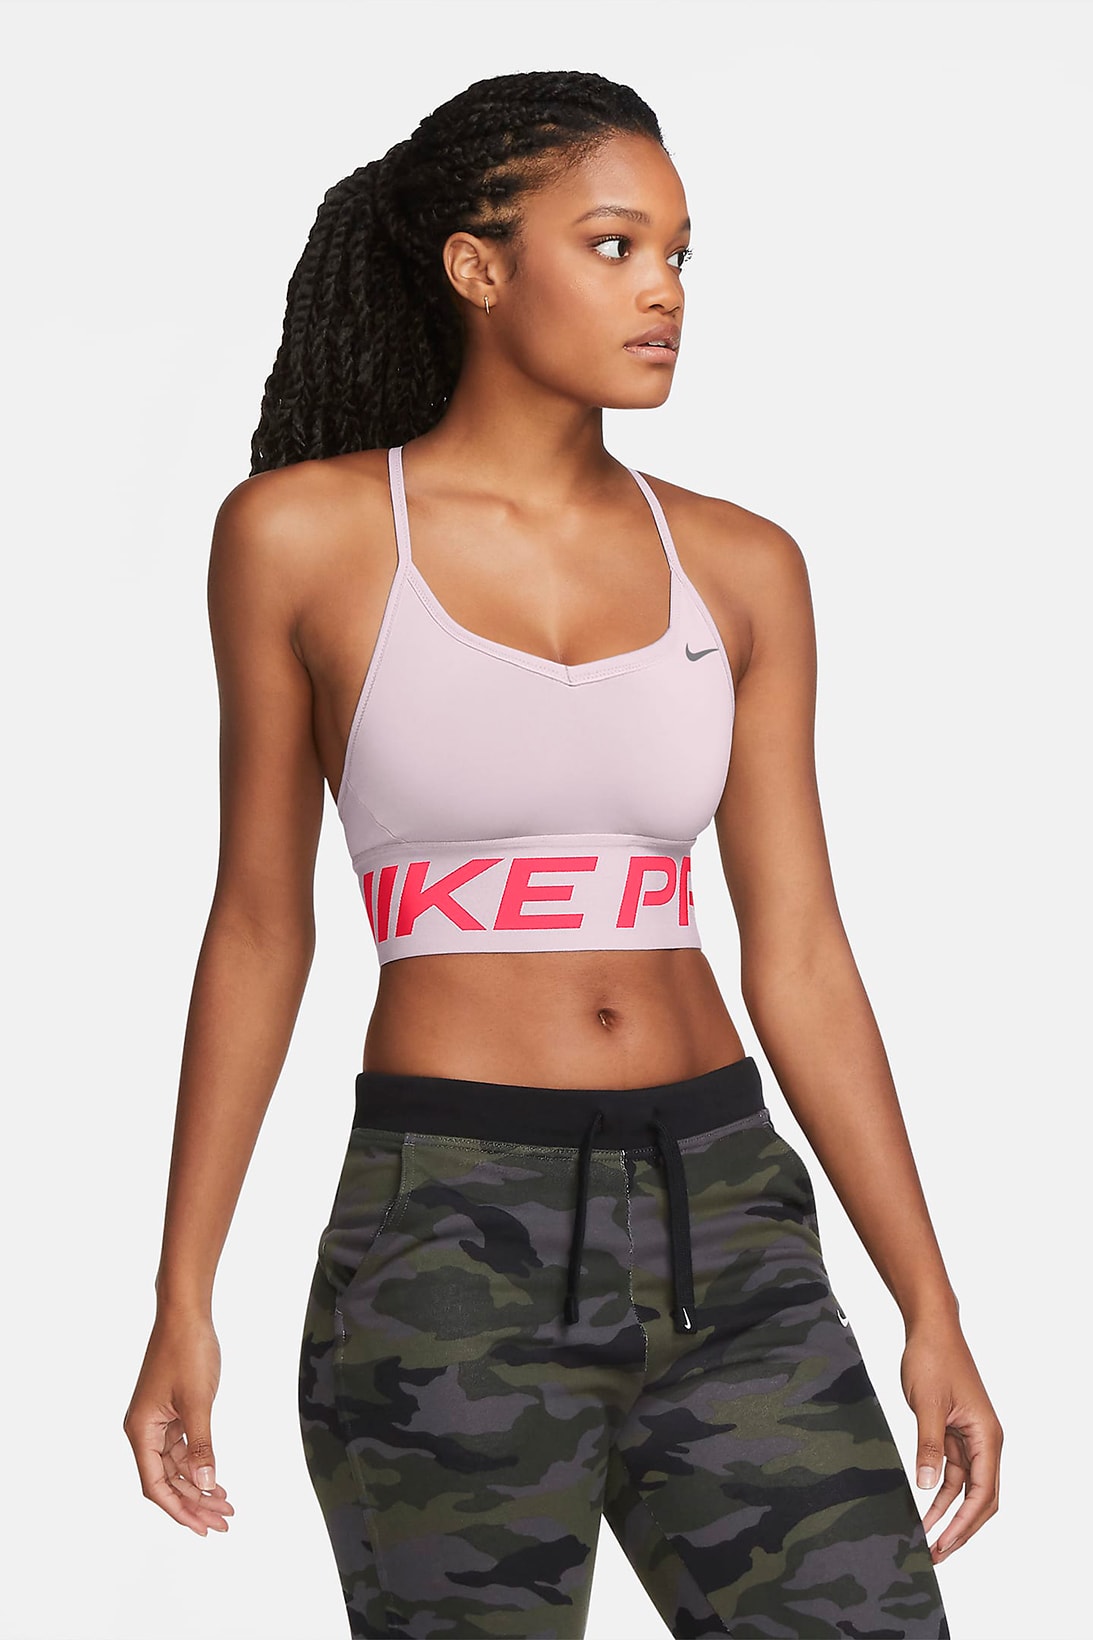 Nike Shorts Outfit  Sporty outfits, Nike outfits, Clothes